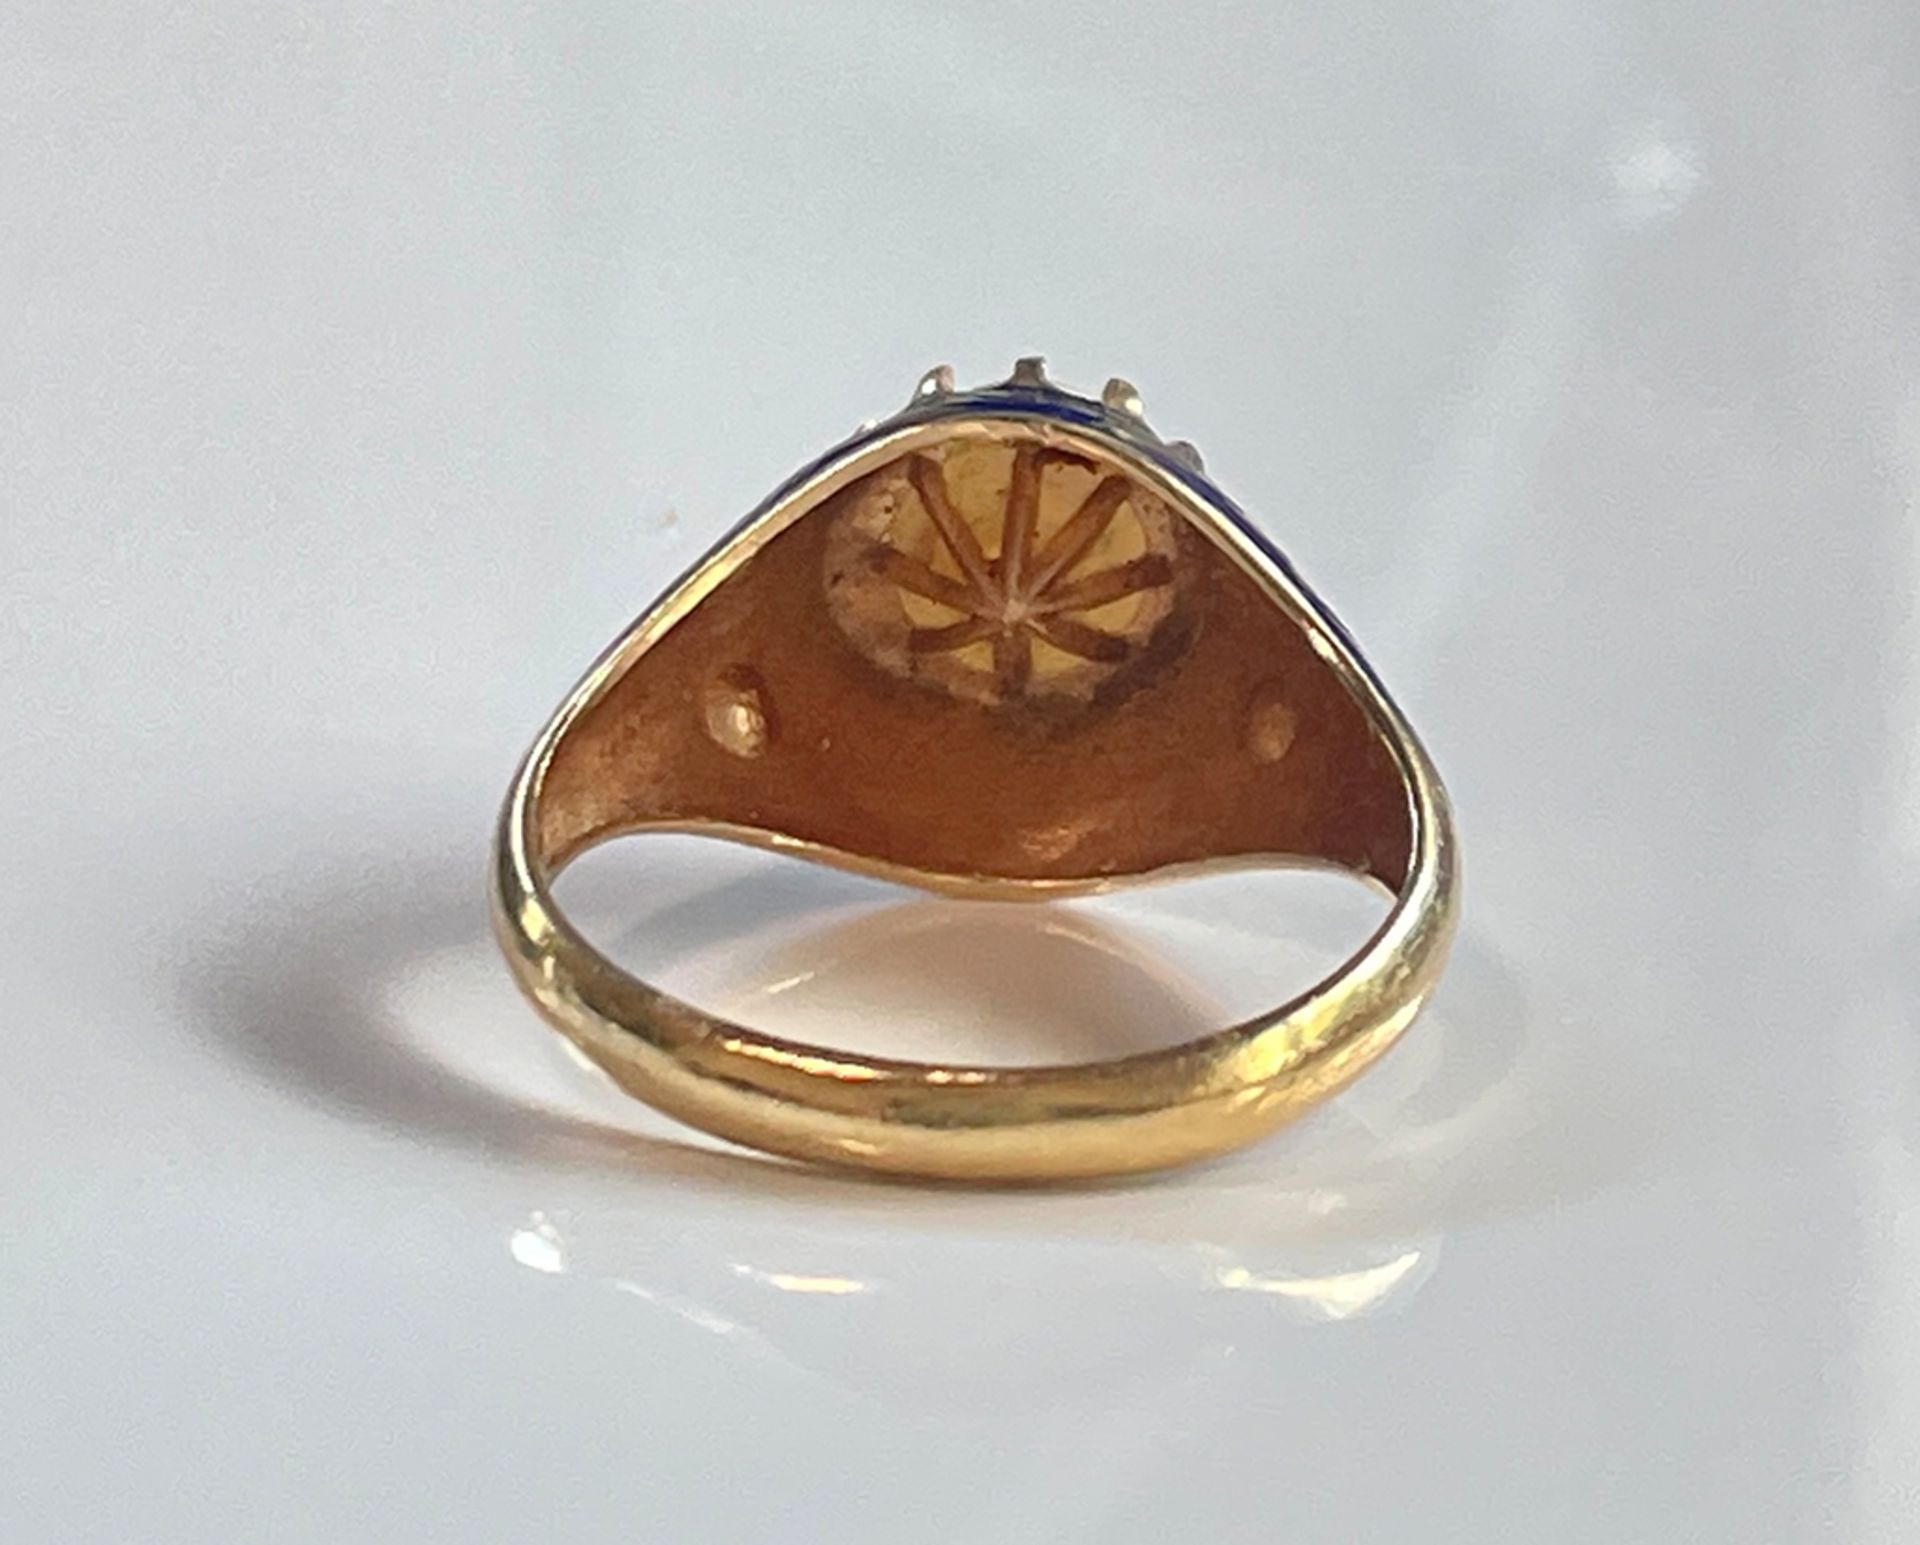 Antique ring of 18K Gold with Enamel and a Pearl - Image 4 of 5